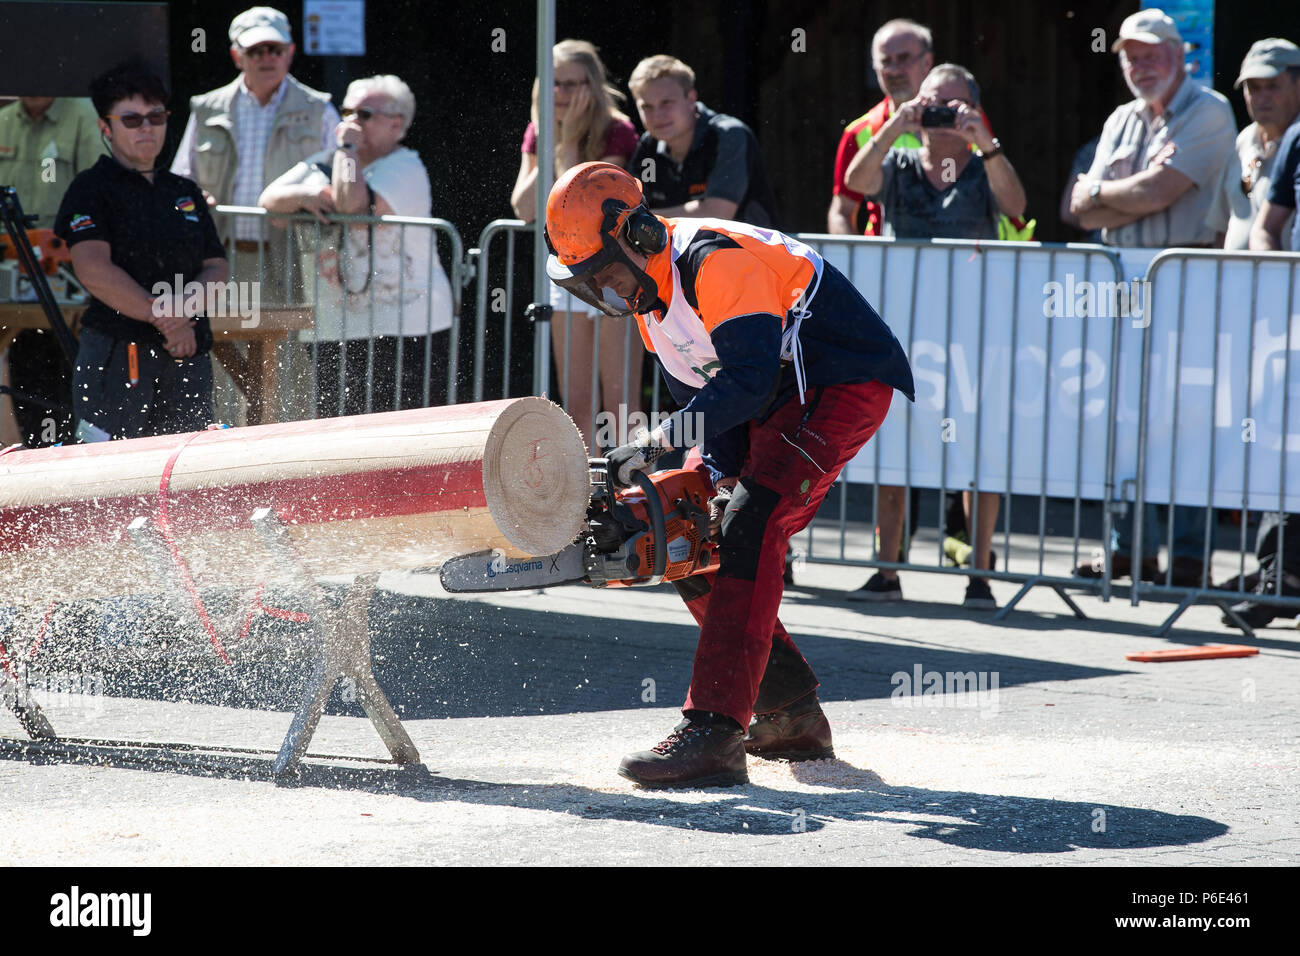 Seesen, Germany. 30th June, 2018. Bjarne Meyer, starter in the Chainsaw Cup, completes the discipline 'Kettenwechsel' (lit. chain changing). Arround 55 participants are competing for the title of 'Niedersaechsischer Waldarbeitsmeister' (lit. Lower Saxony Forestry Champion). Credit: Swen Pförtner/dpa/Alamy Live News Stock Photo